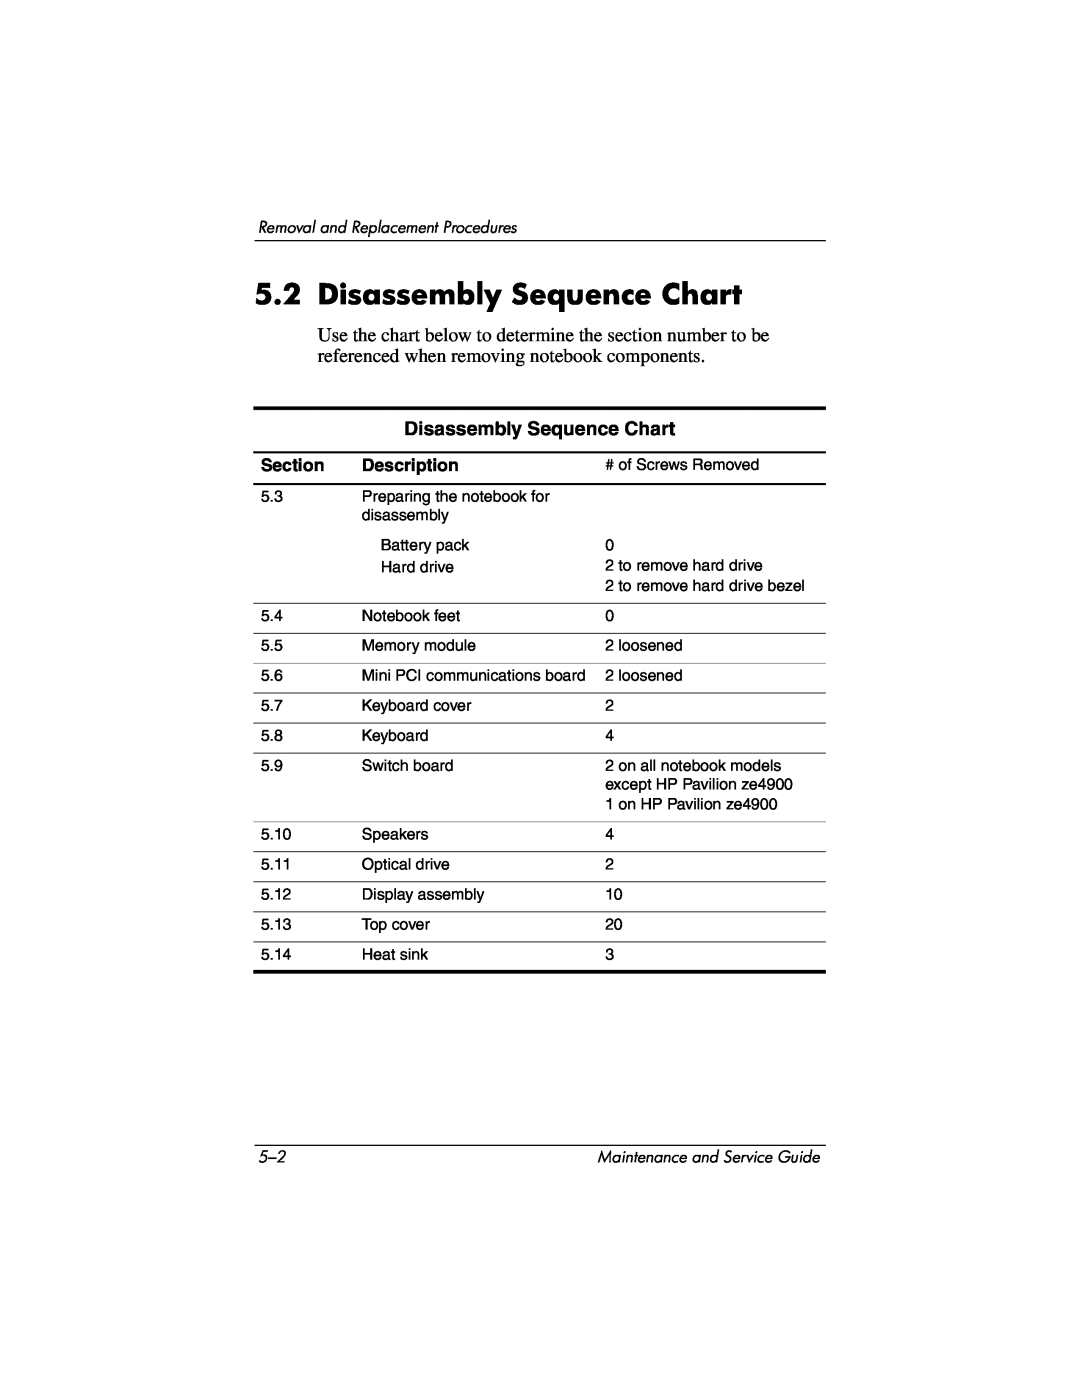 HP NX9030, NX9040, NX9020, ZE4900 manual Disassembly Sequence Chart, Section, Description, Removal and Replacement Procedures 